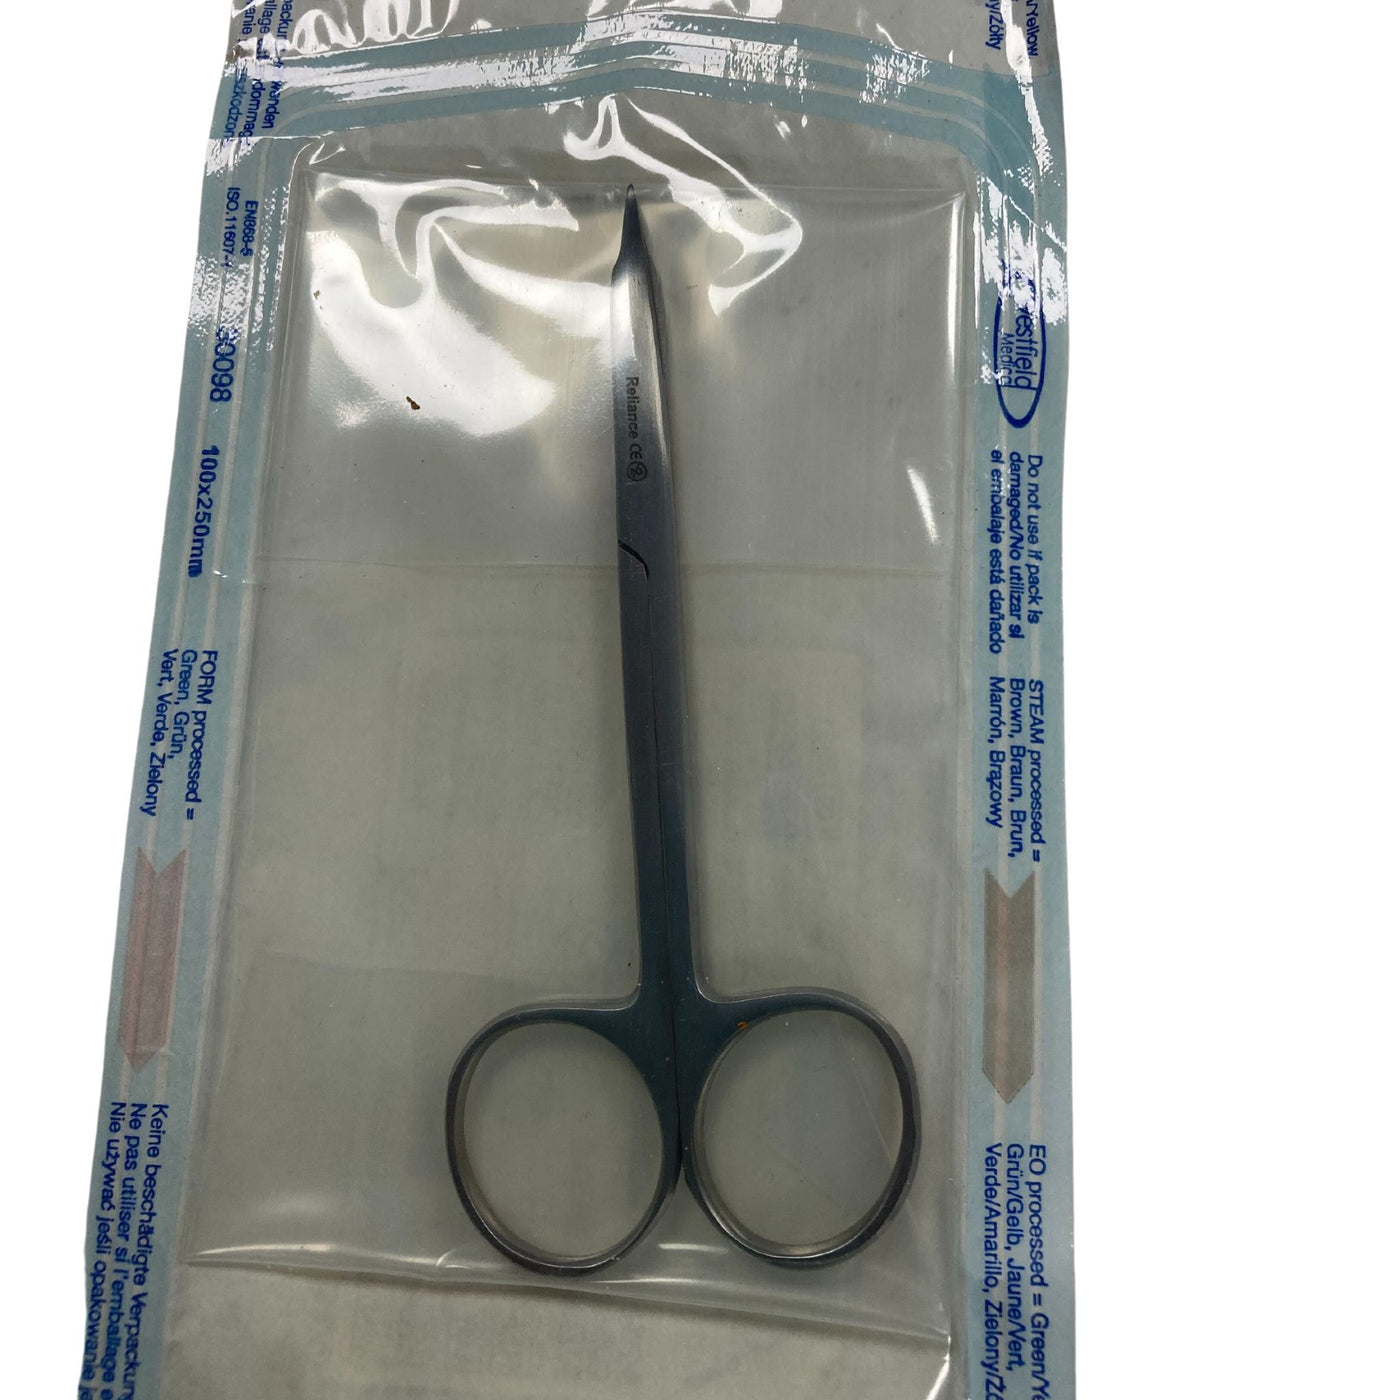 CLEARANCE - Scissor Tenotomy Curved in sterile package